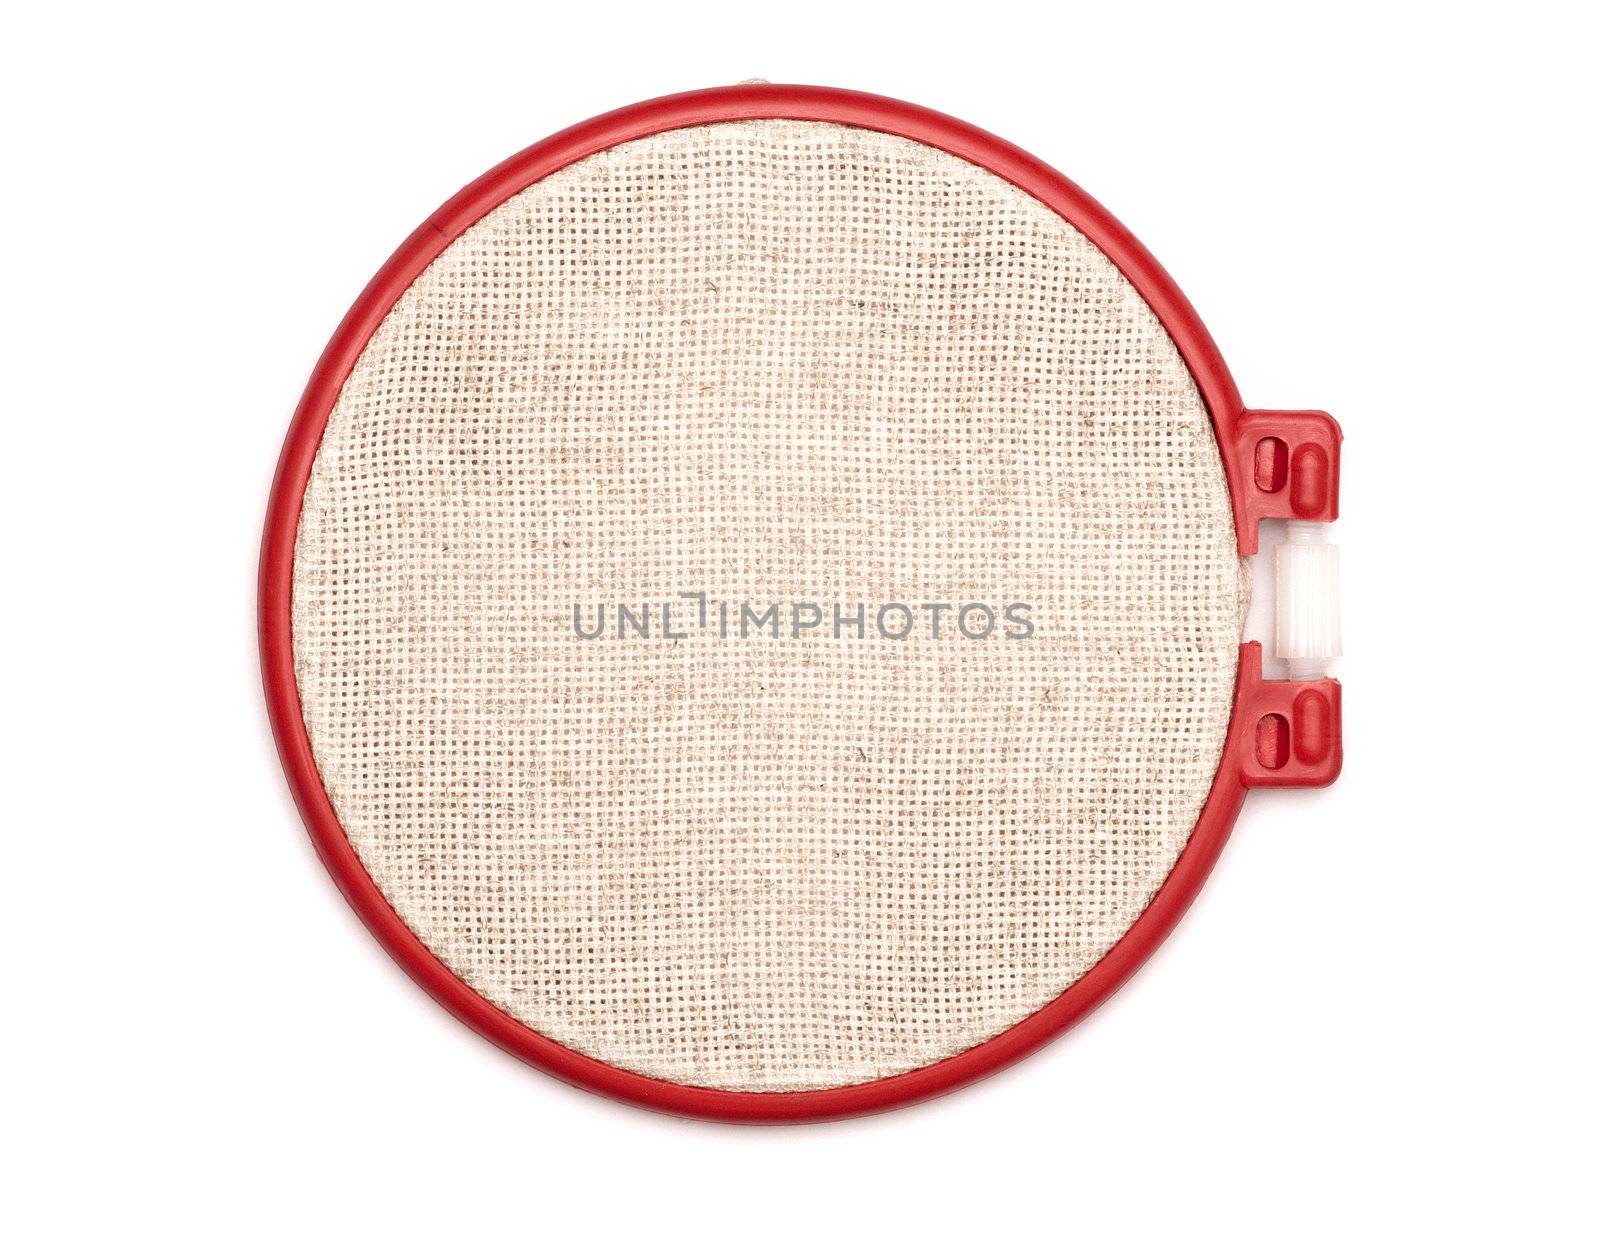 The embroidery hoop is on the white background by DNKSTUDIO